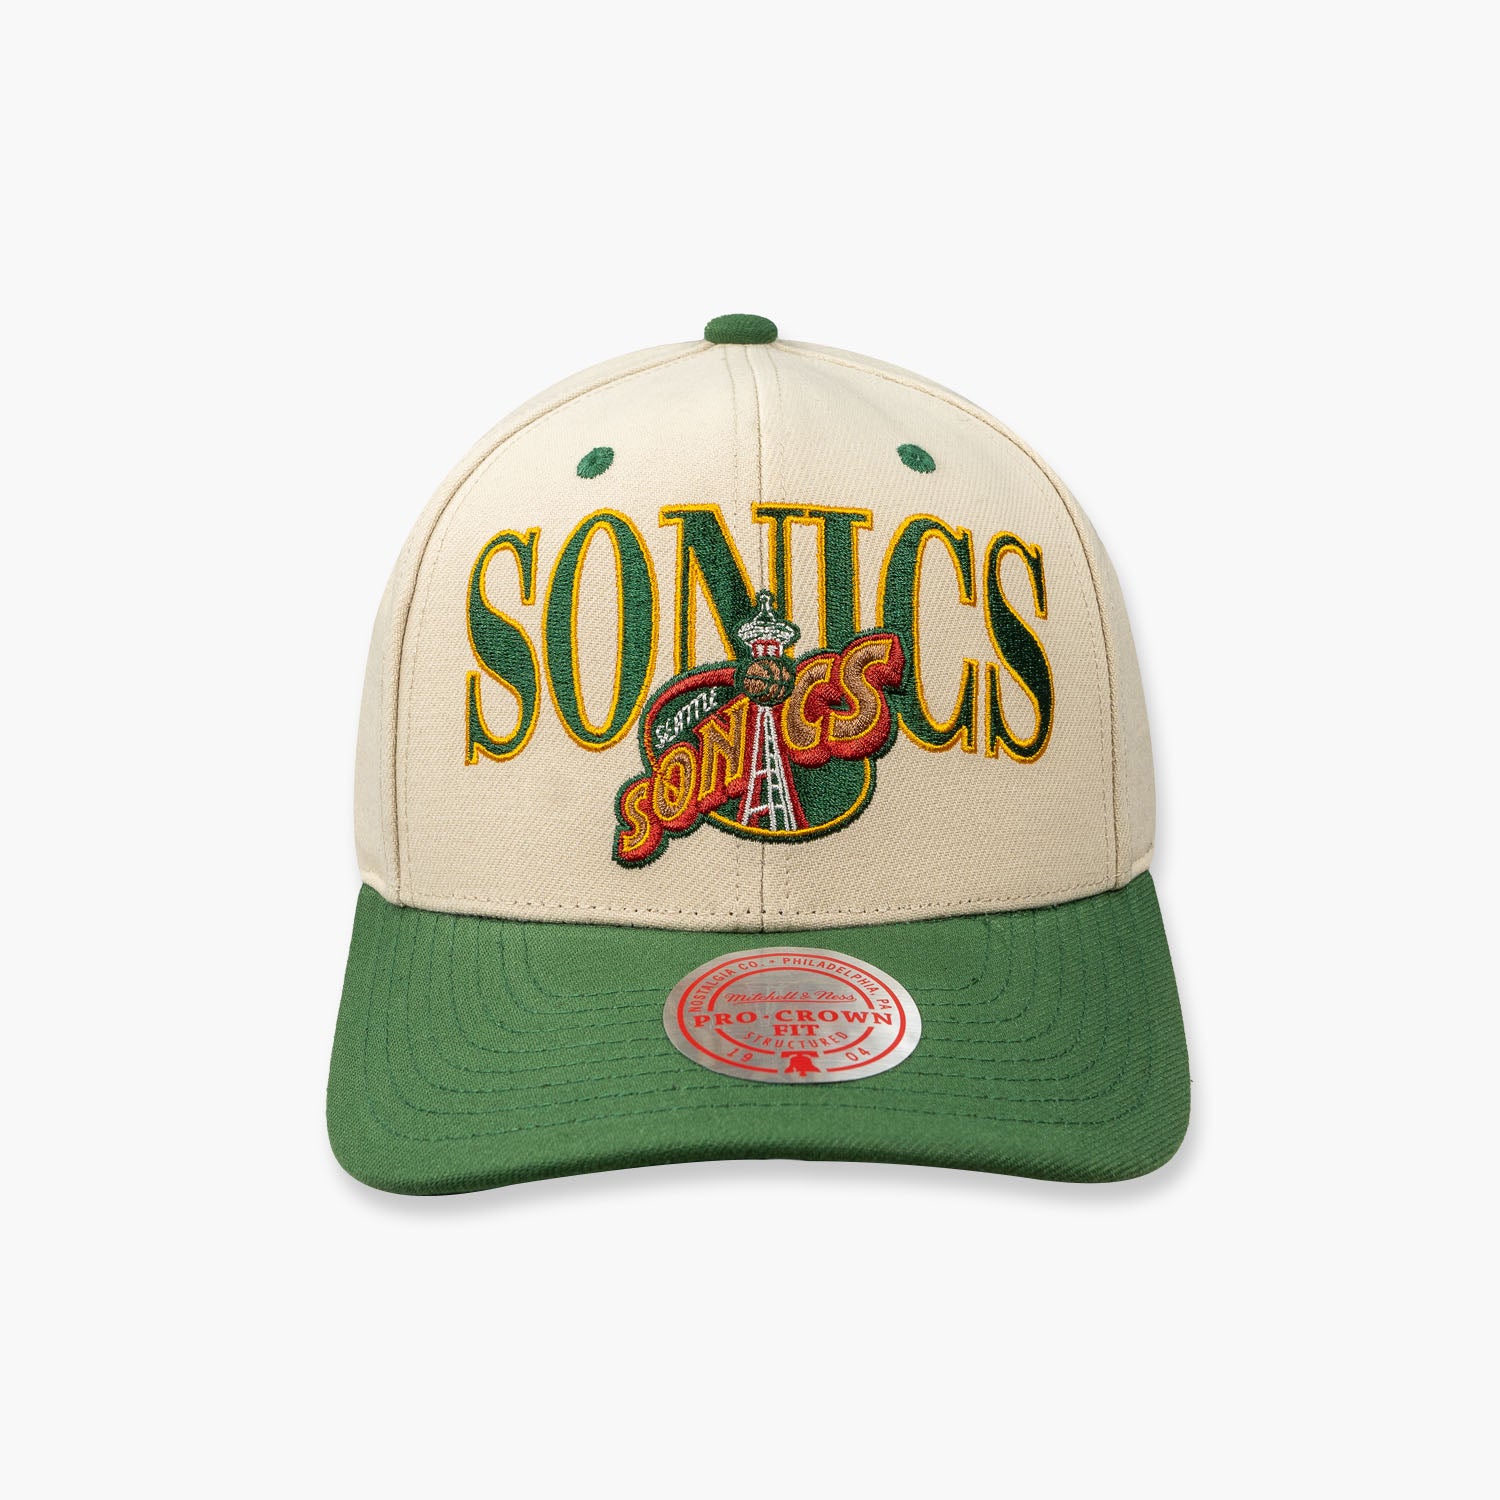 Mitchell & Ness Seattle Supersonics 'Highway' Pro Crown Snapback